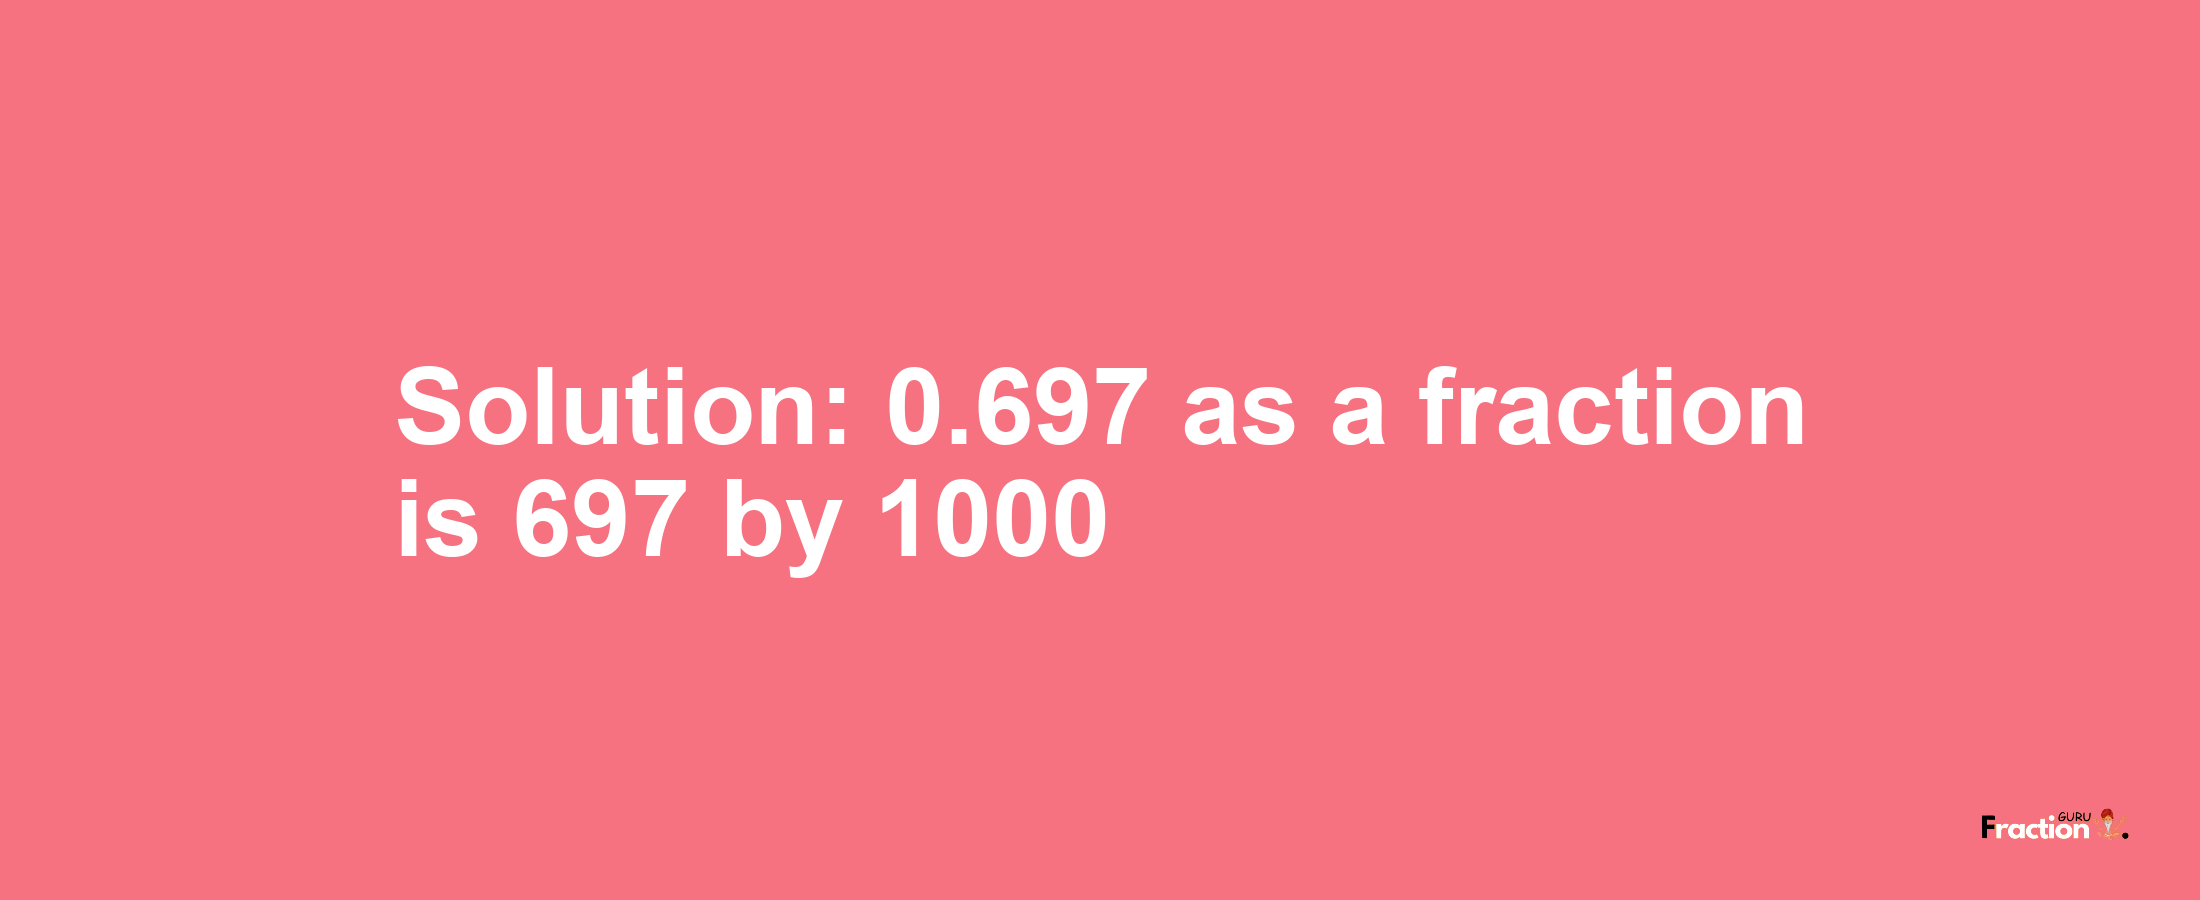 Solution:0.697 as a fraction is 697/1000